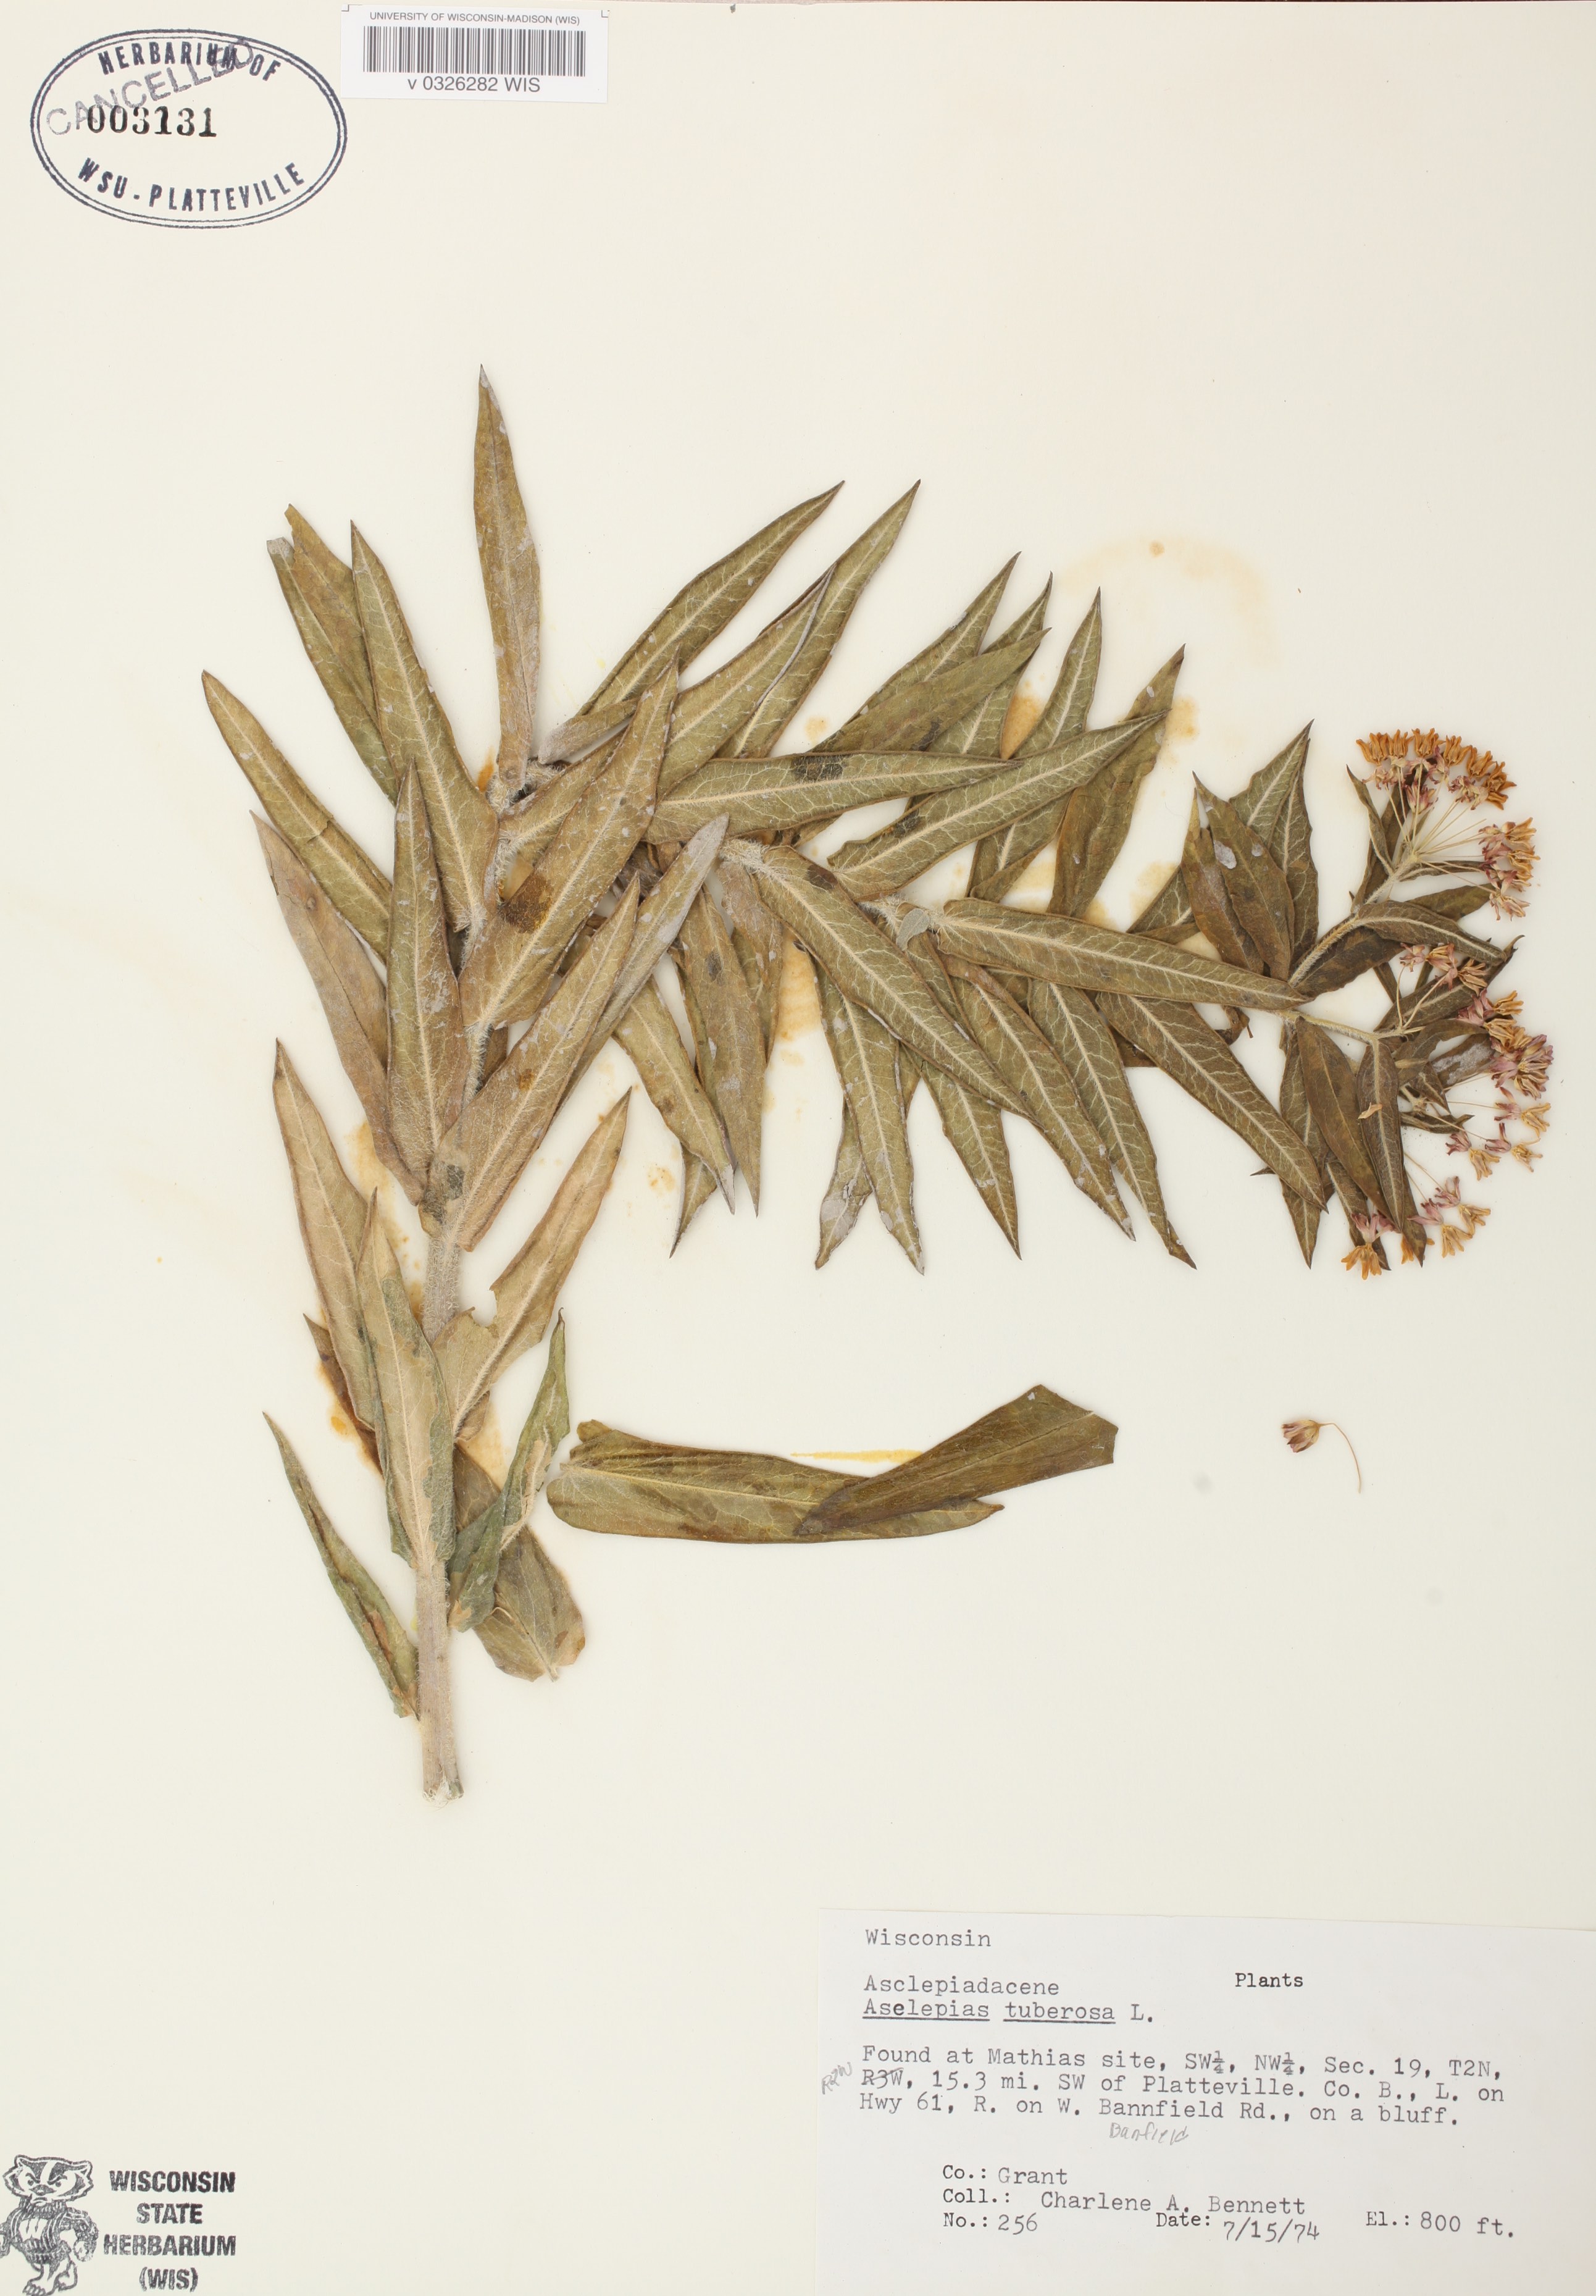 Butterfly Milkweed specimen collected July 15, 1974 in Grant County near Platteville on a bluff.